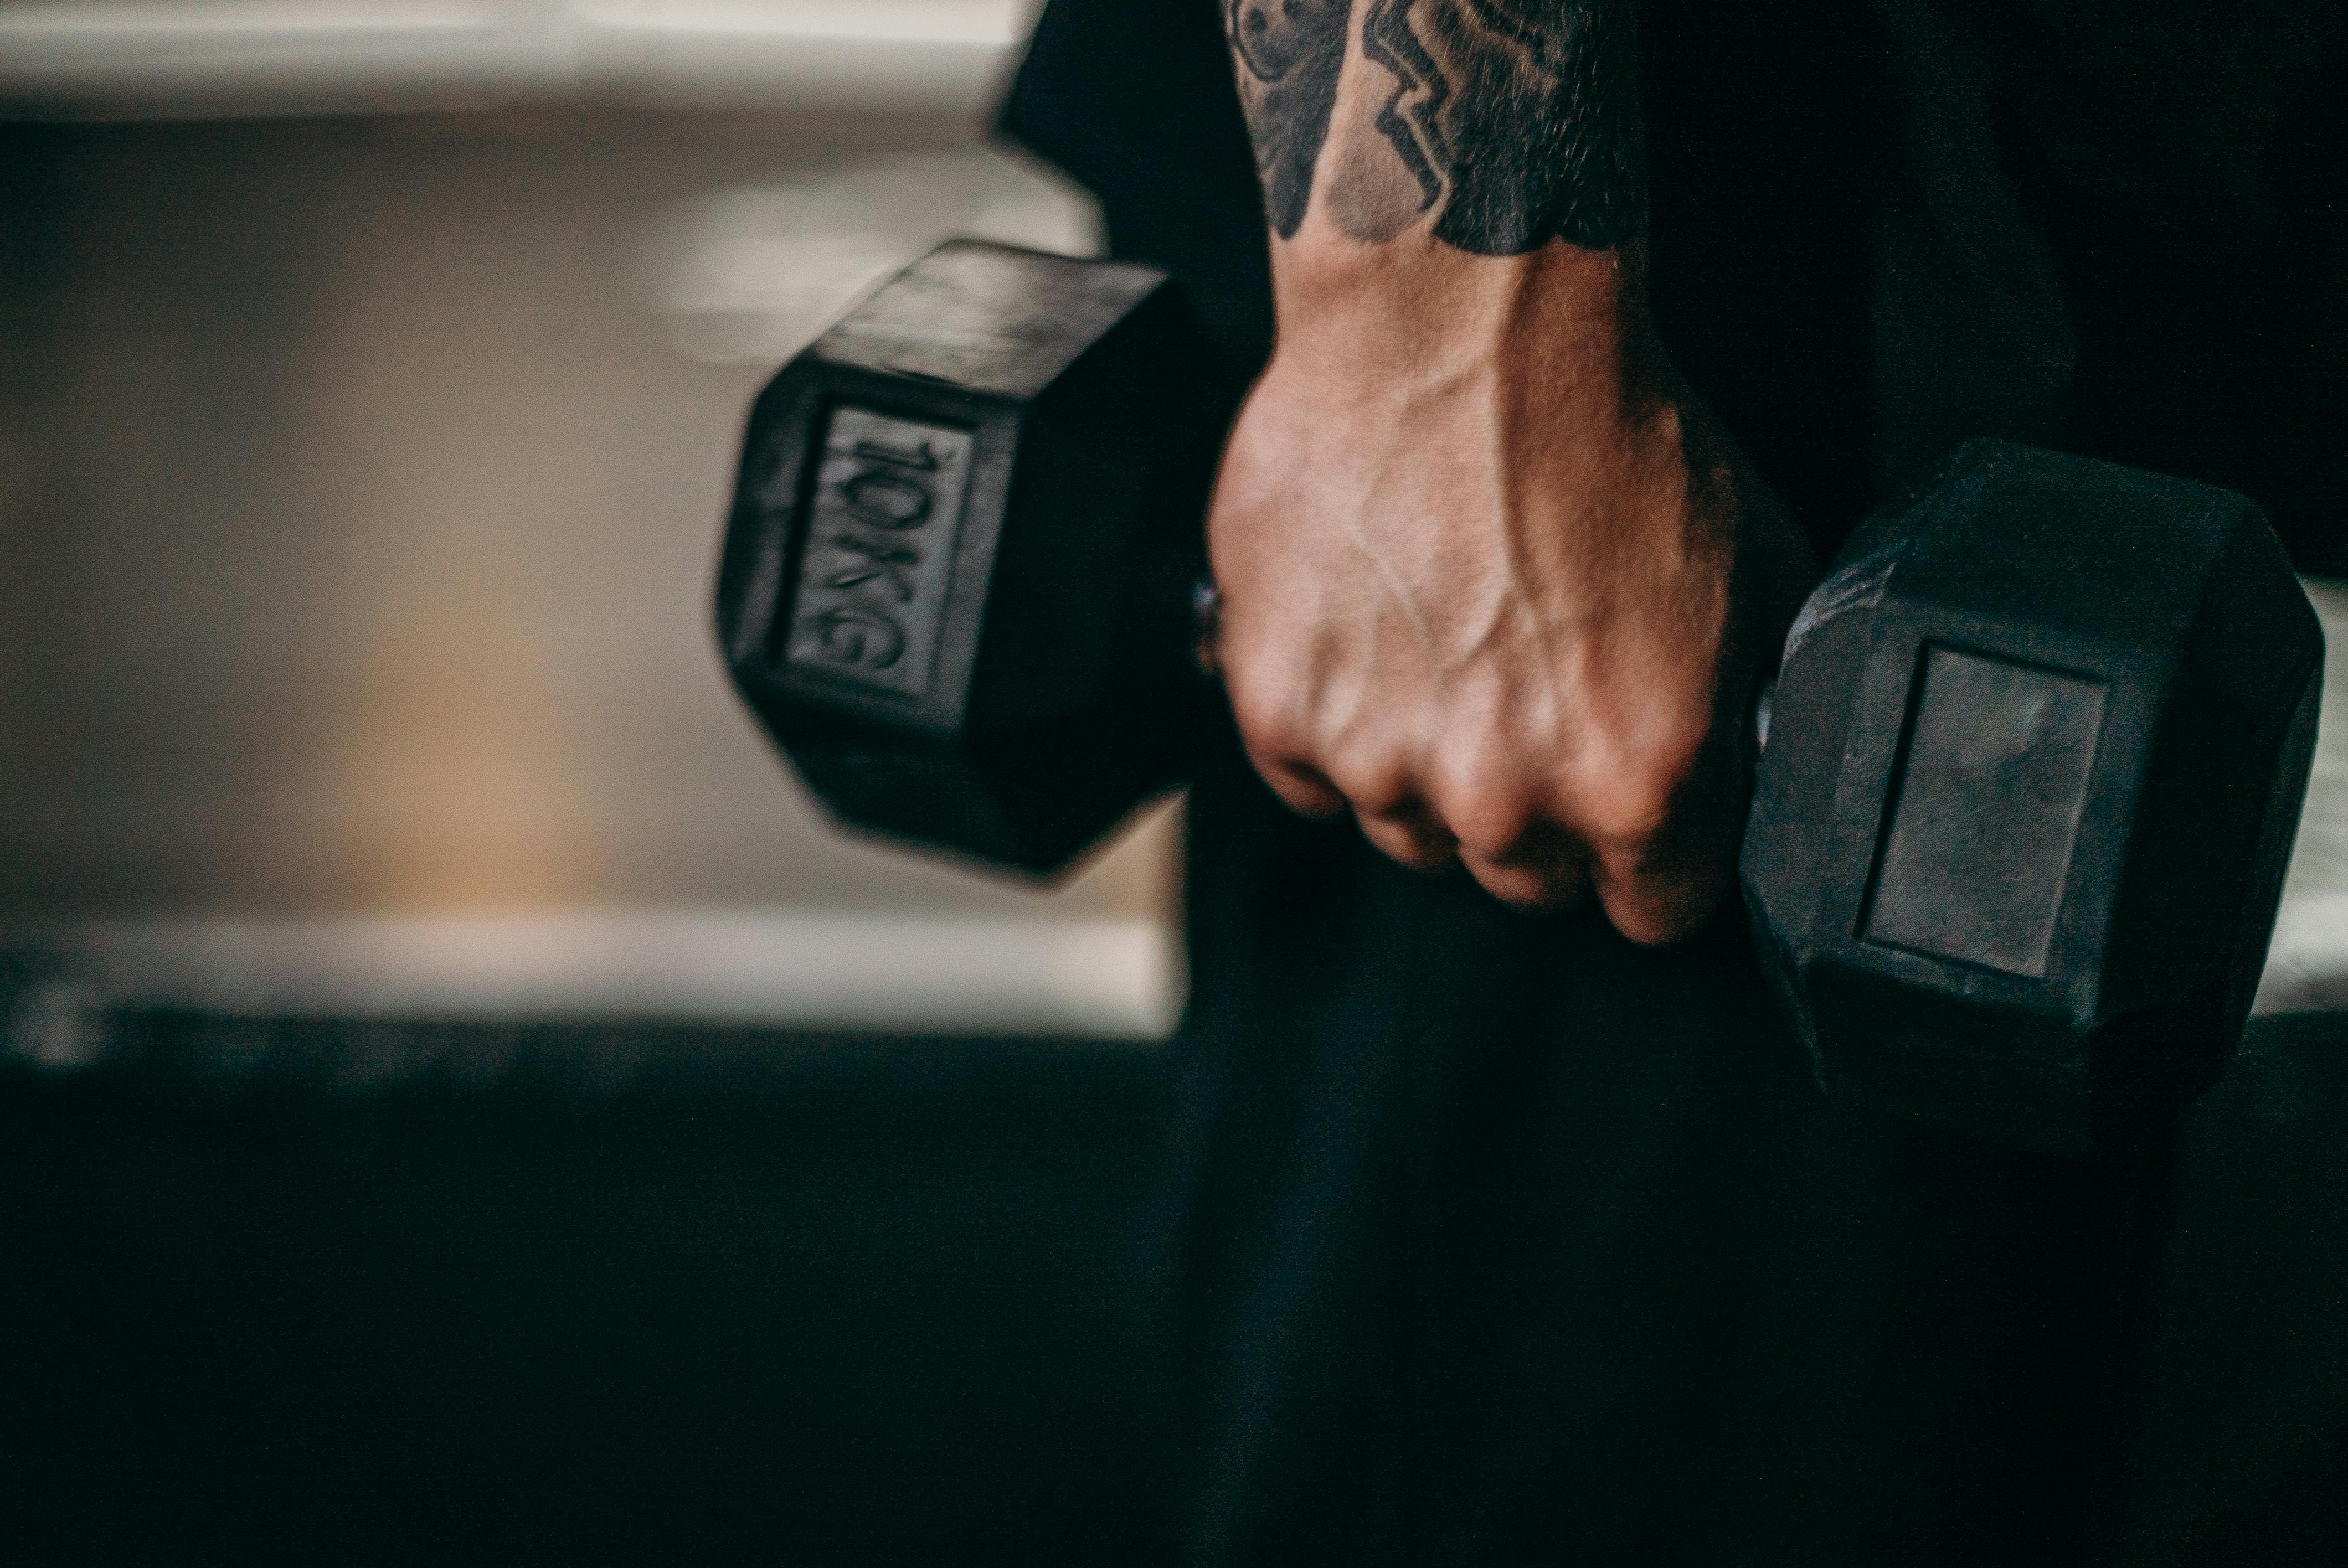 person holding black dumbbell with black tattoo